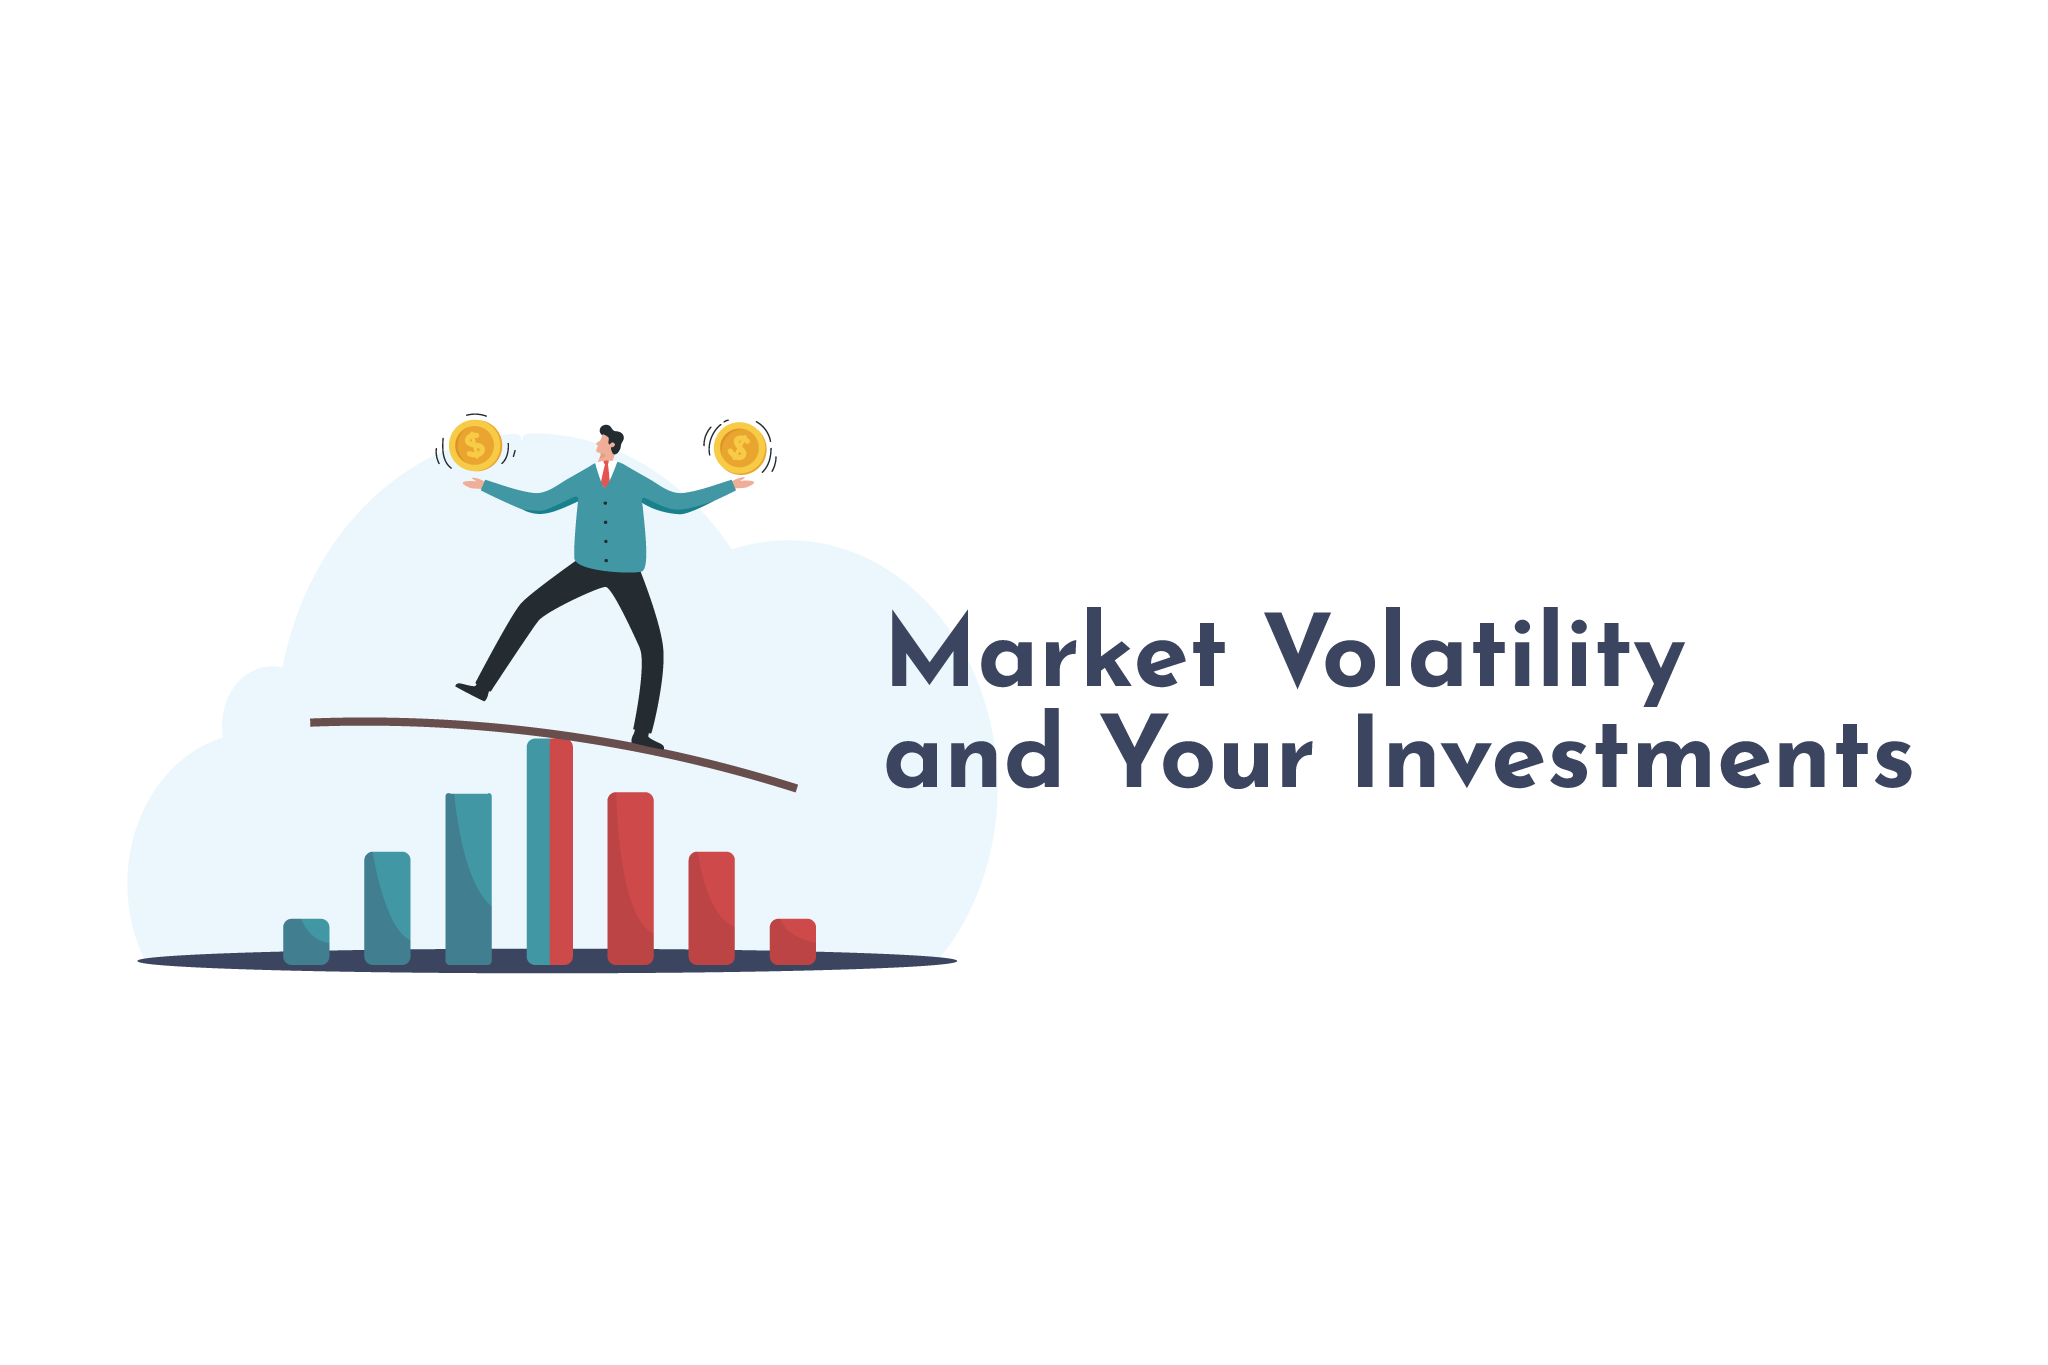 Market Volatility and Your Investments